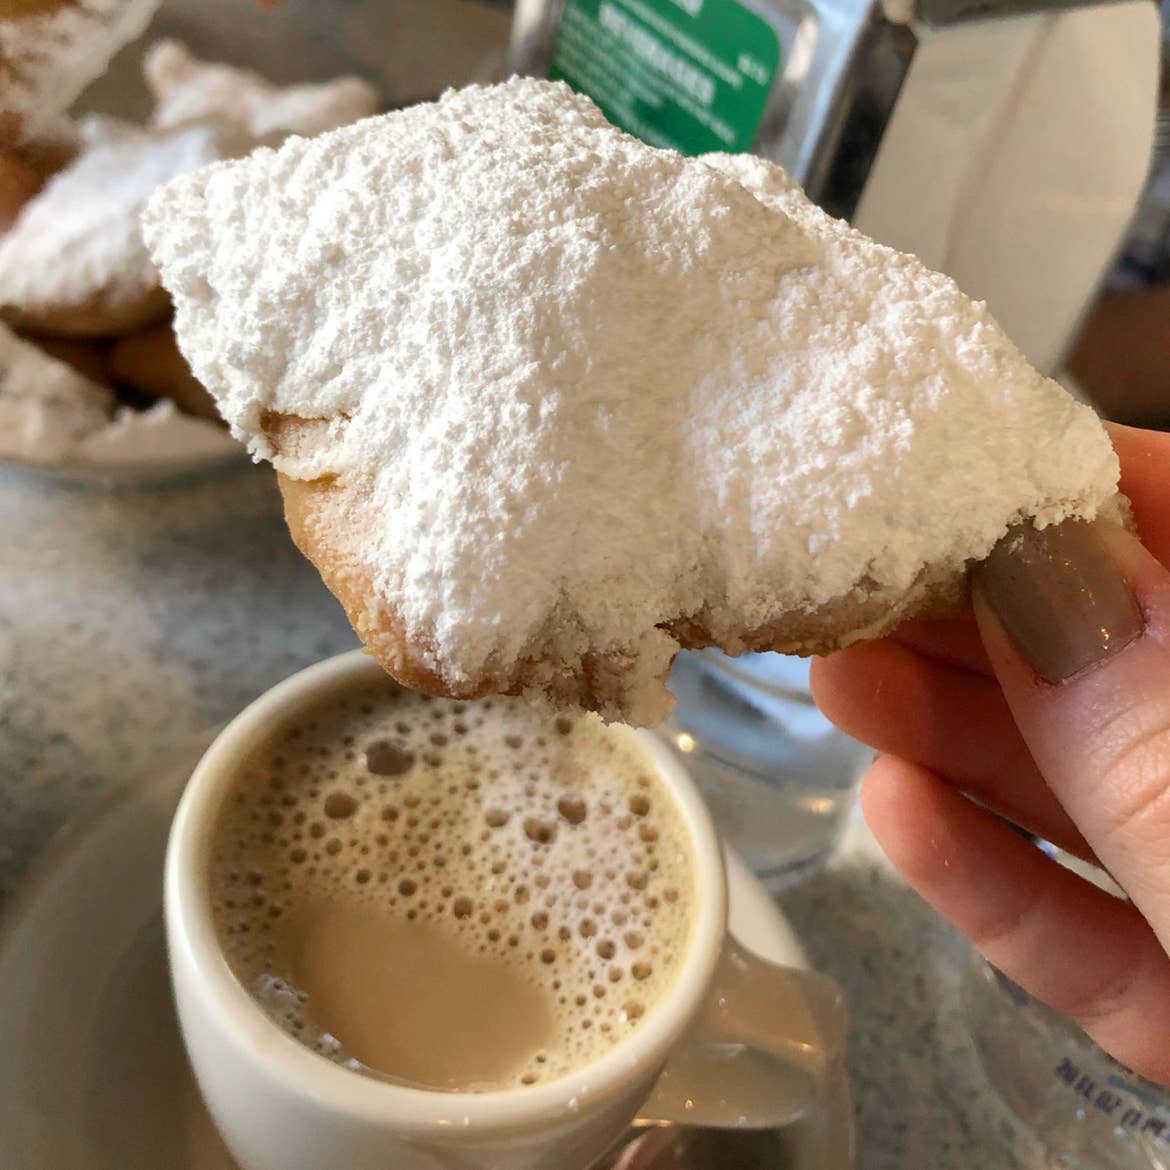 A Cafe Du Monde napkin box and a white coffee mug placed on a table while a beignet is held.